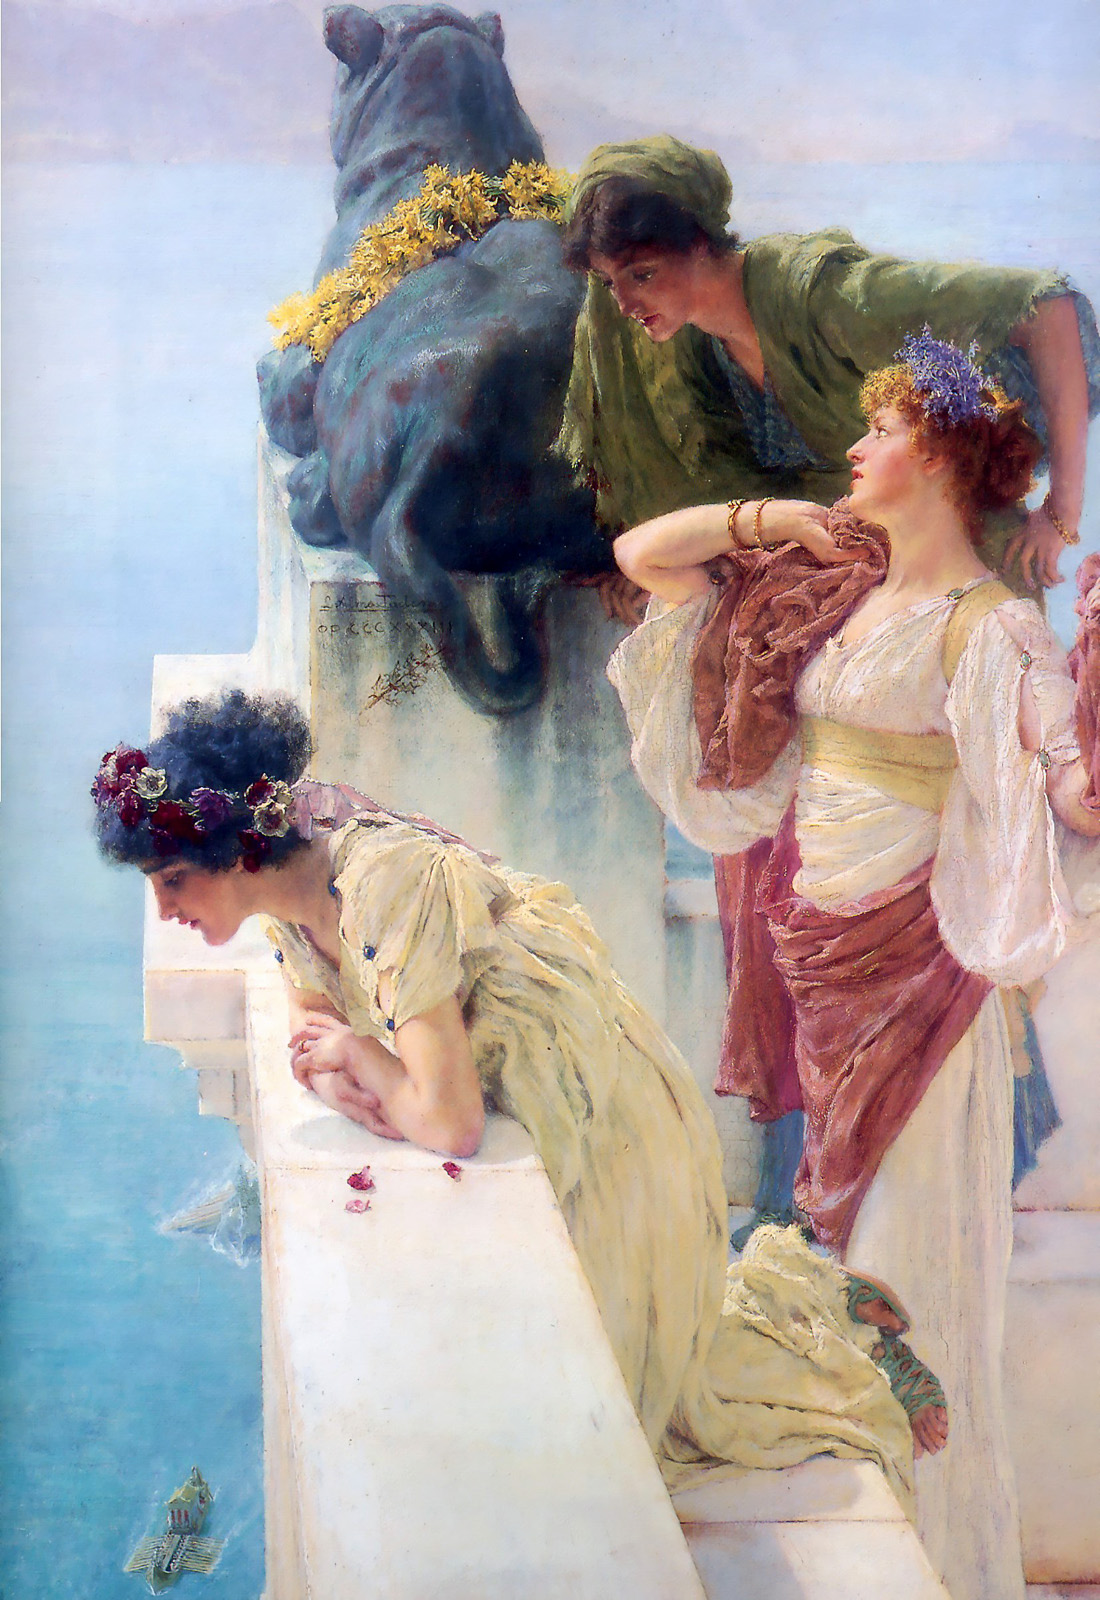 Three women on a marble terrace gazing out into the ocean